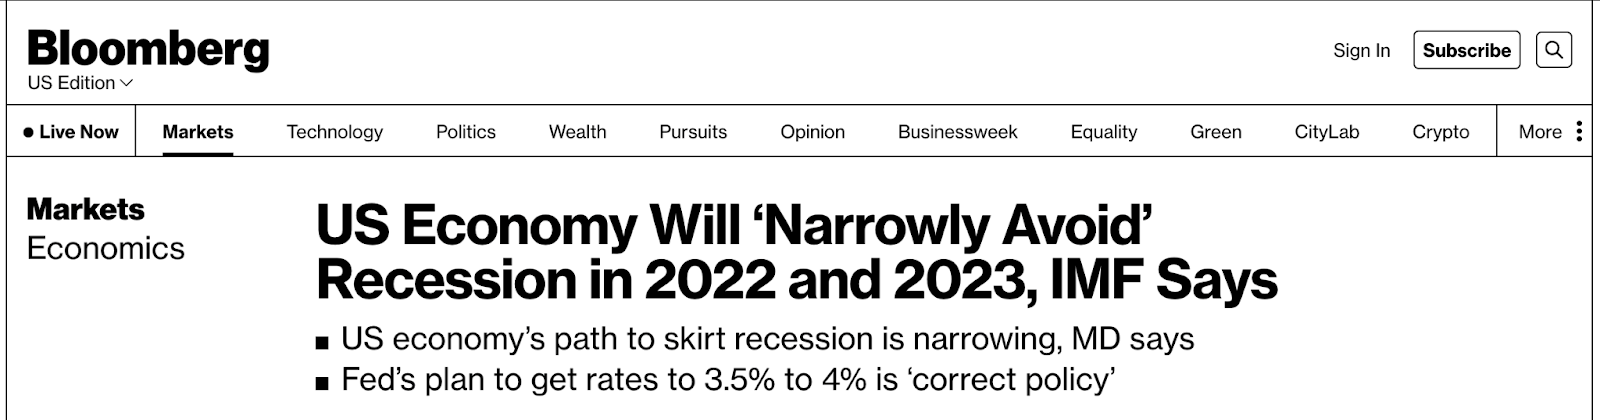 “The US economy is likely to slow in 2022 and 2023 but will ‘narrowly avoid a recession’ as the Federal Reserve implements its rate-tightening plan to curb inflation, the International Monetary Fund said.”